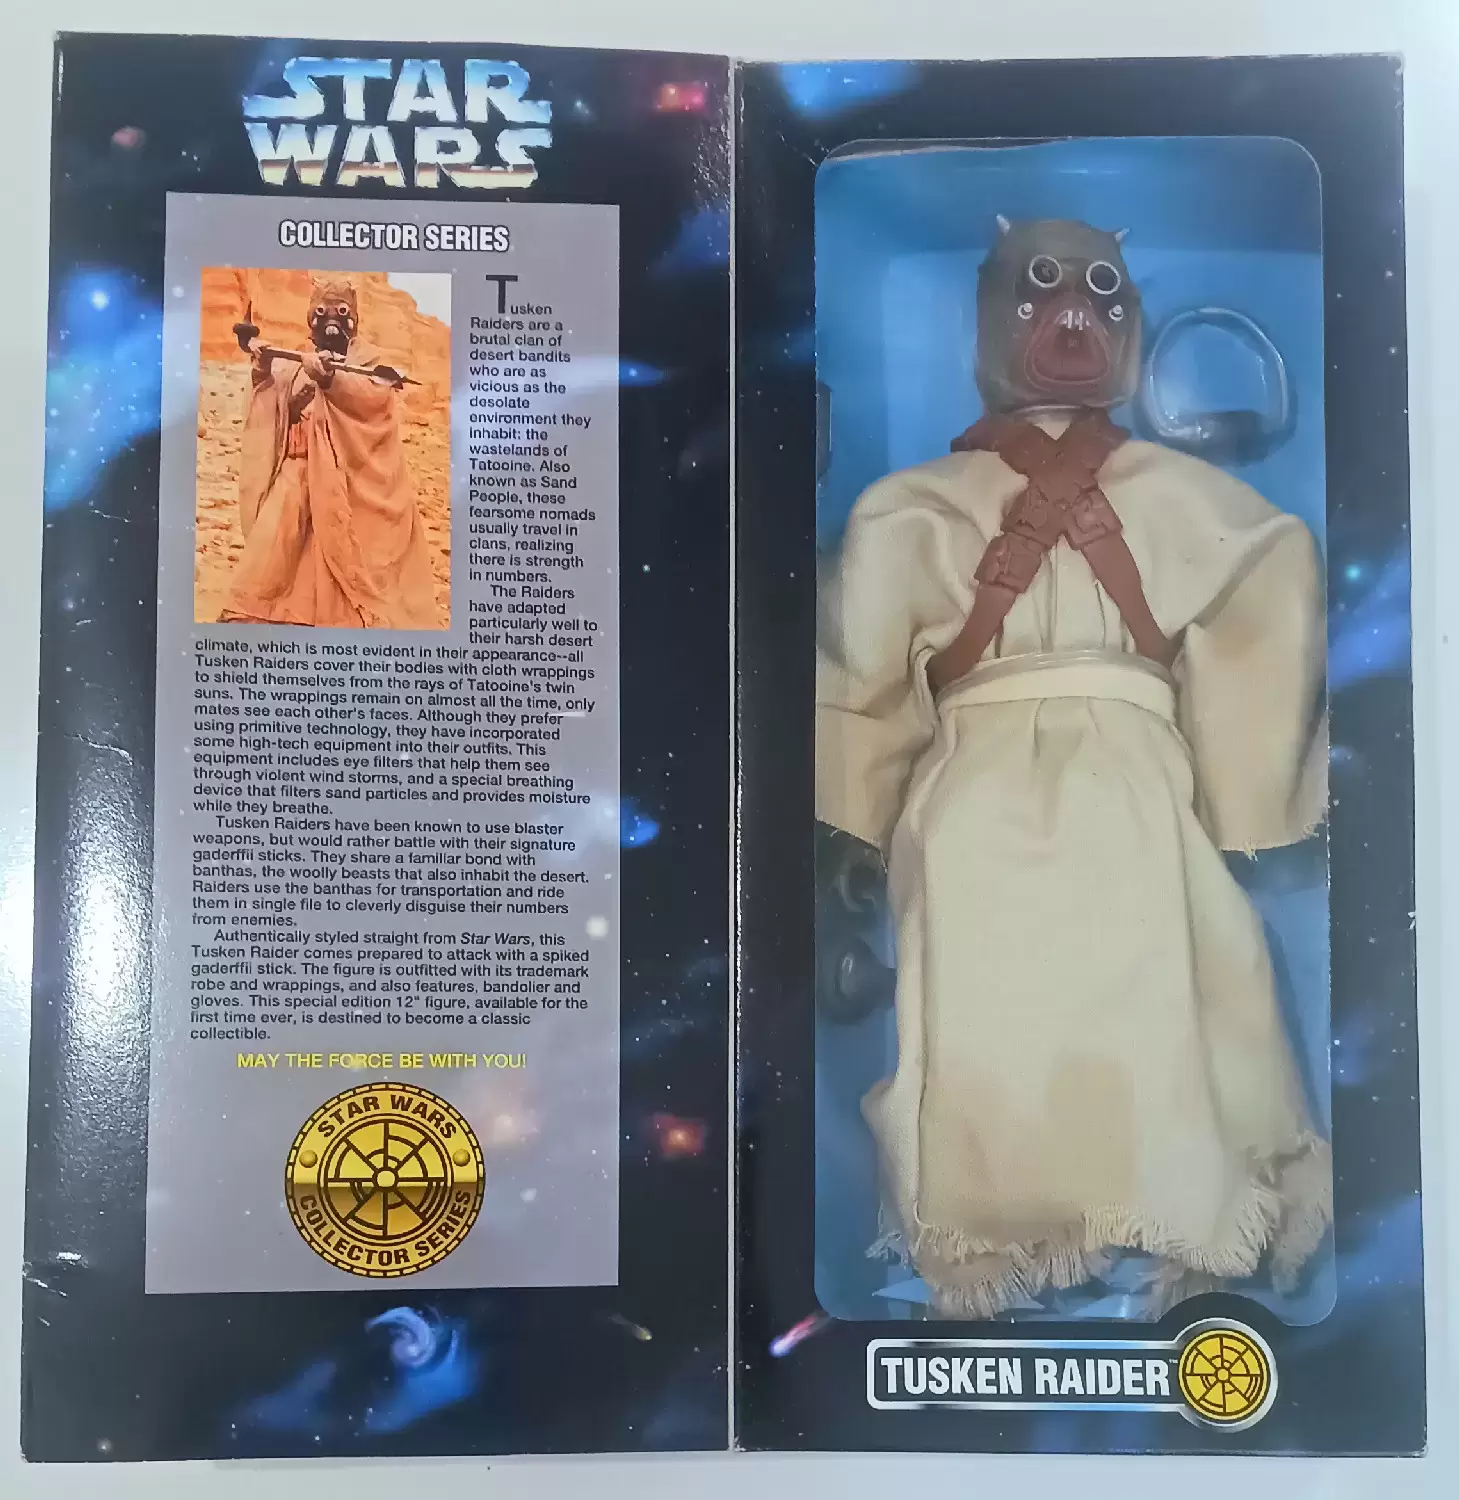 Power of the Force 2 - Star Wars Collector Series Tusken Raider